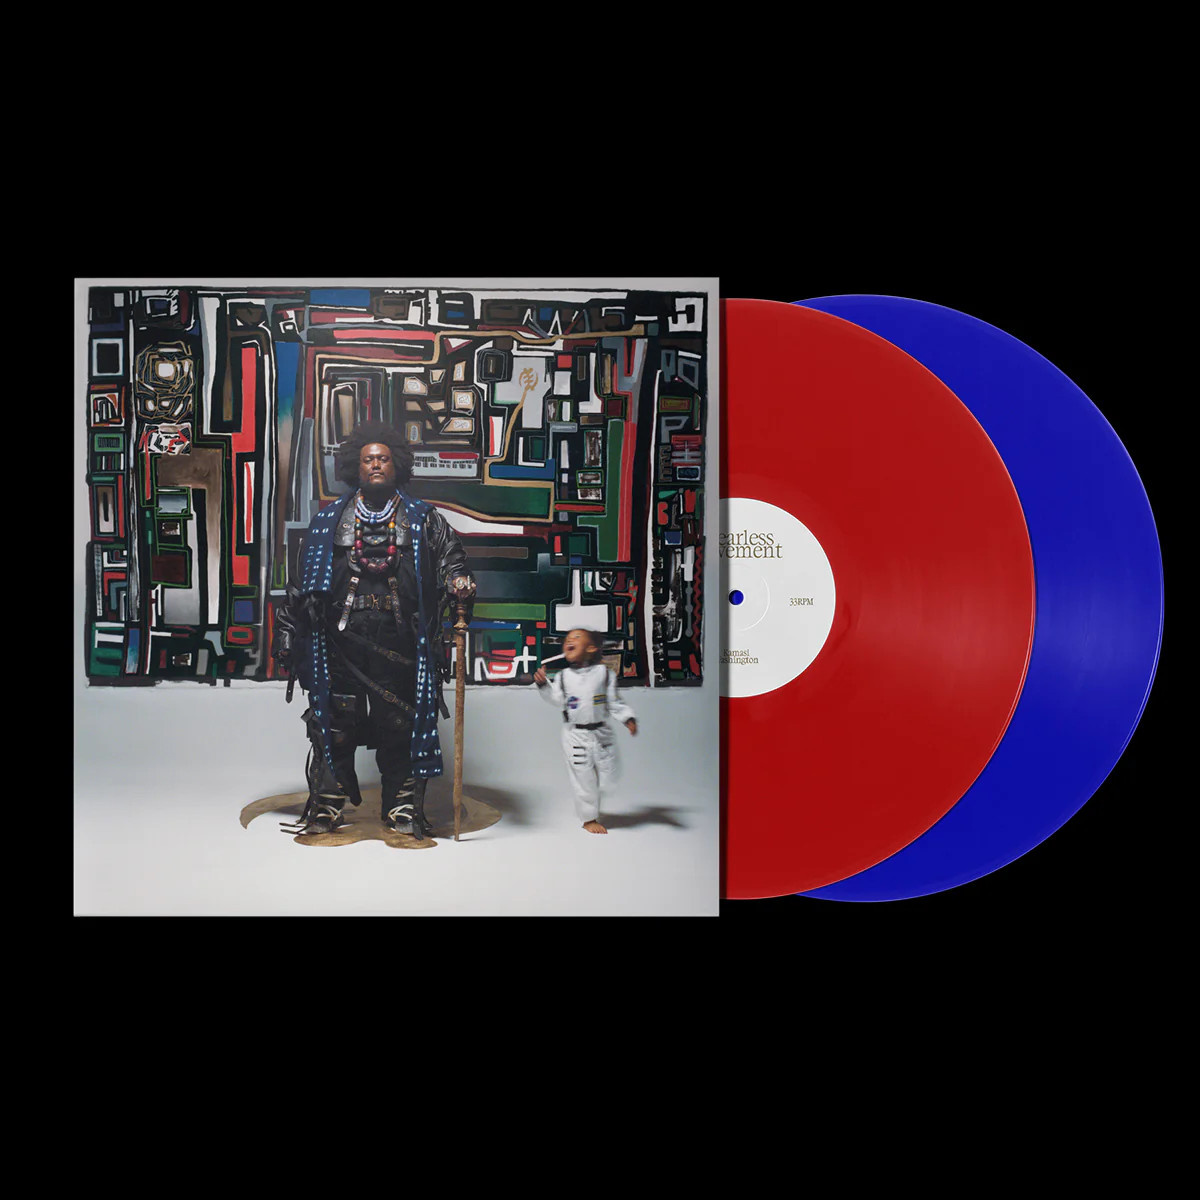 FEARLESS MOVEMENT - COLORED VINYL INDIE EXCLUSIVE LTD. ED.